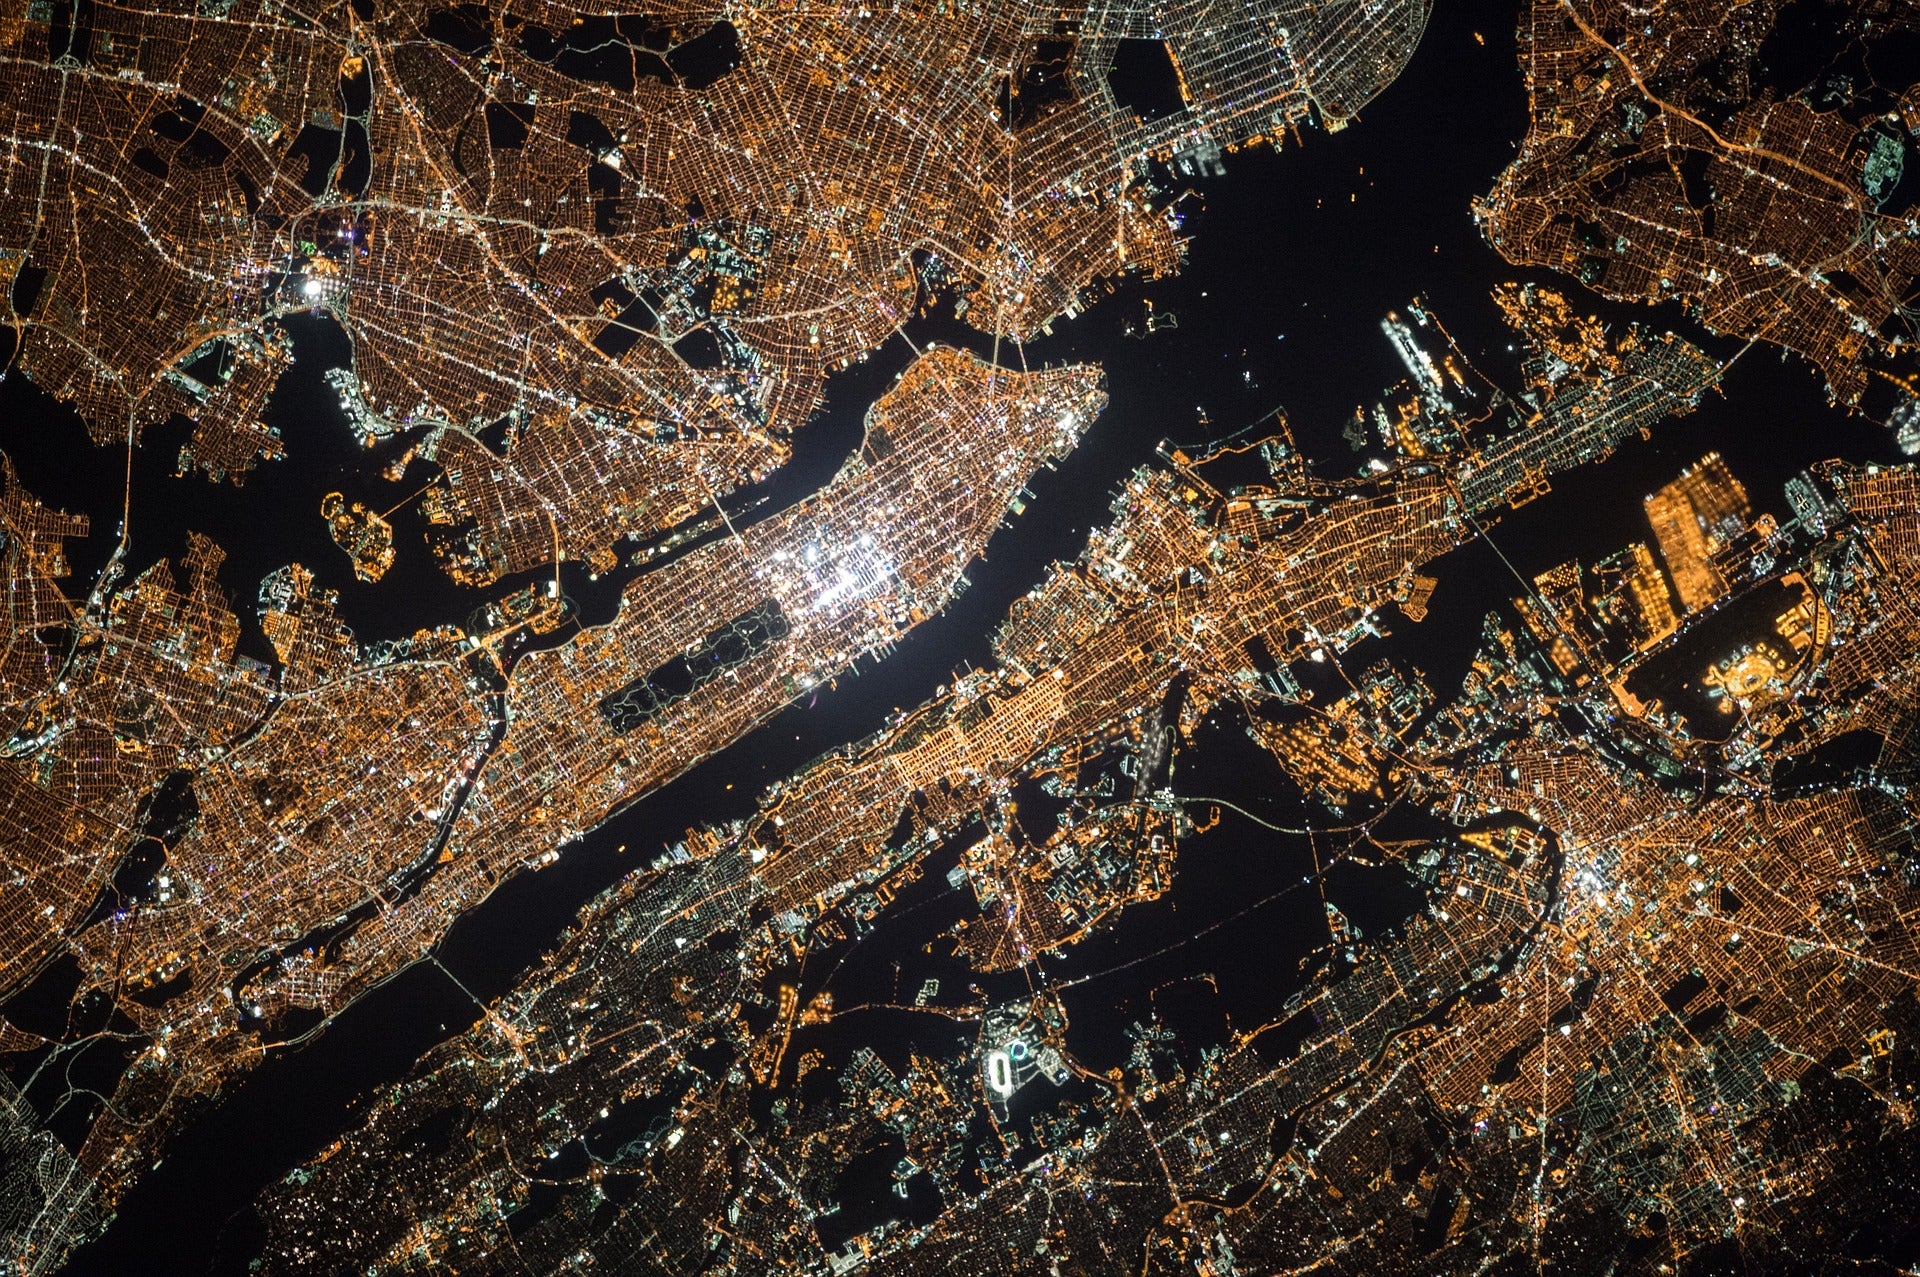 An aerial view of New York City at night.